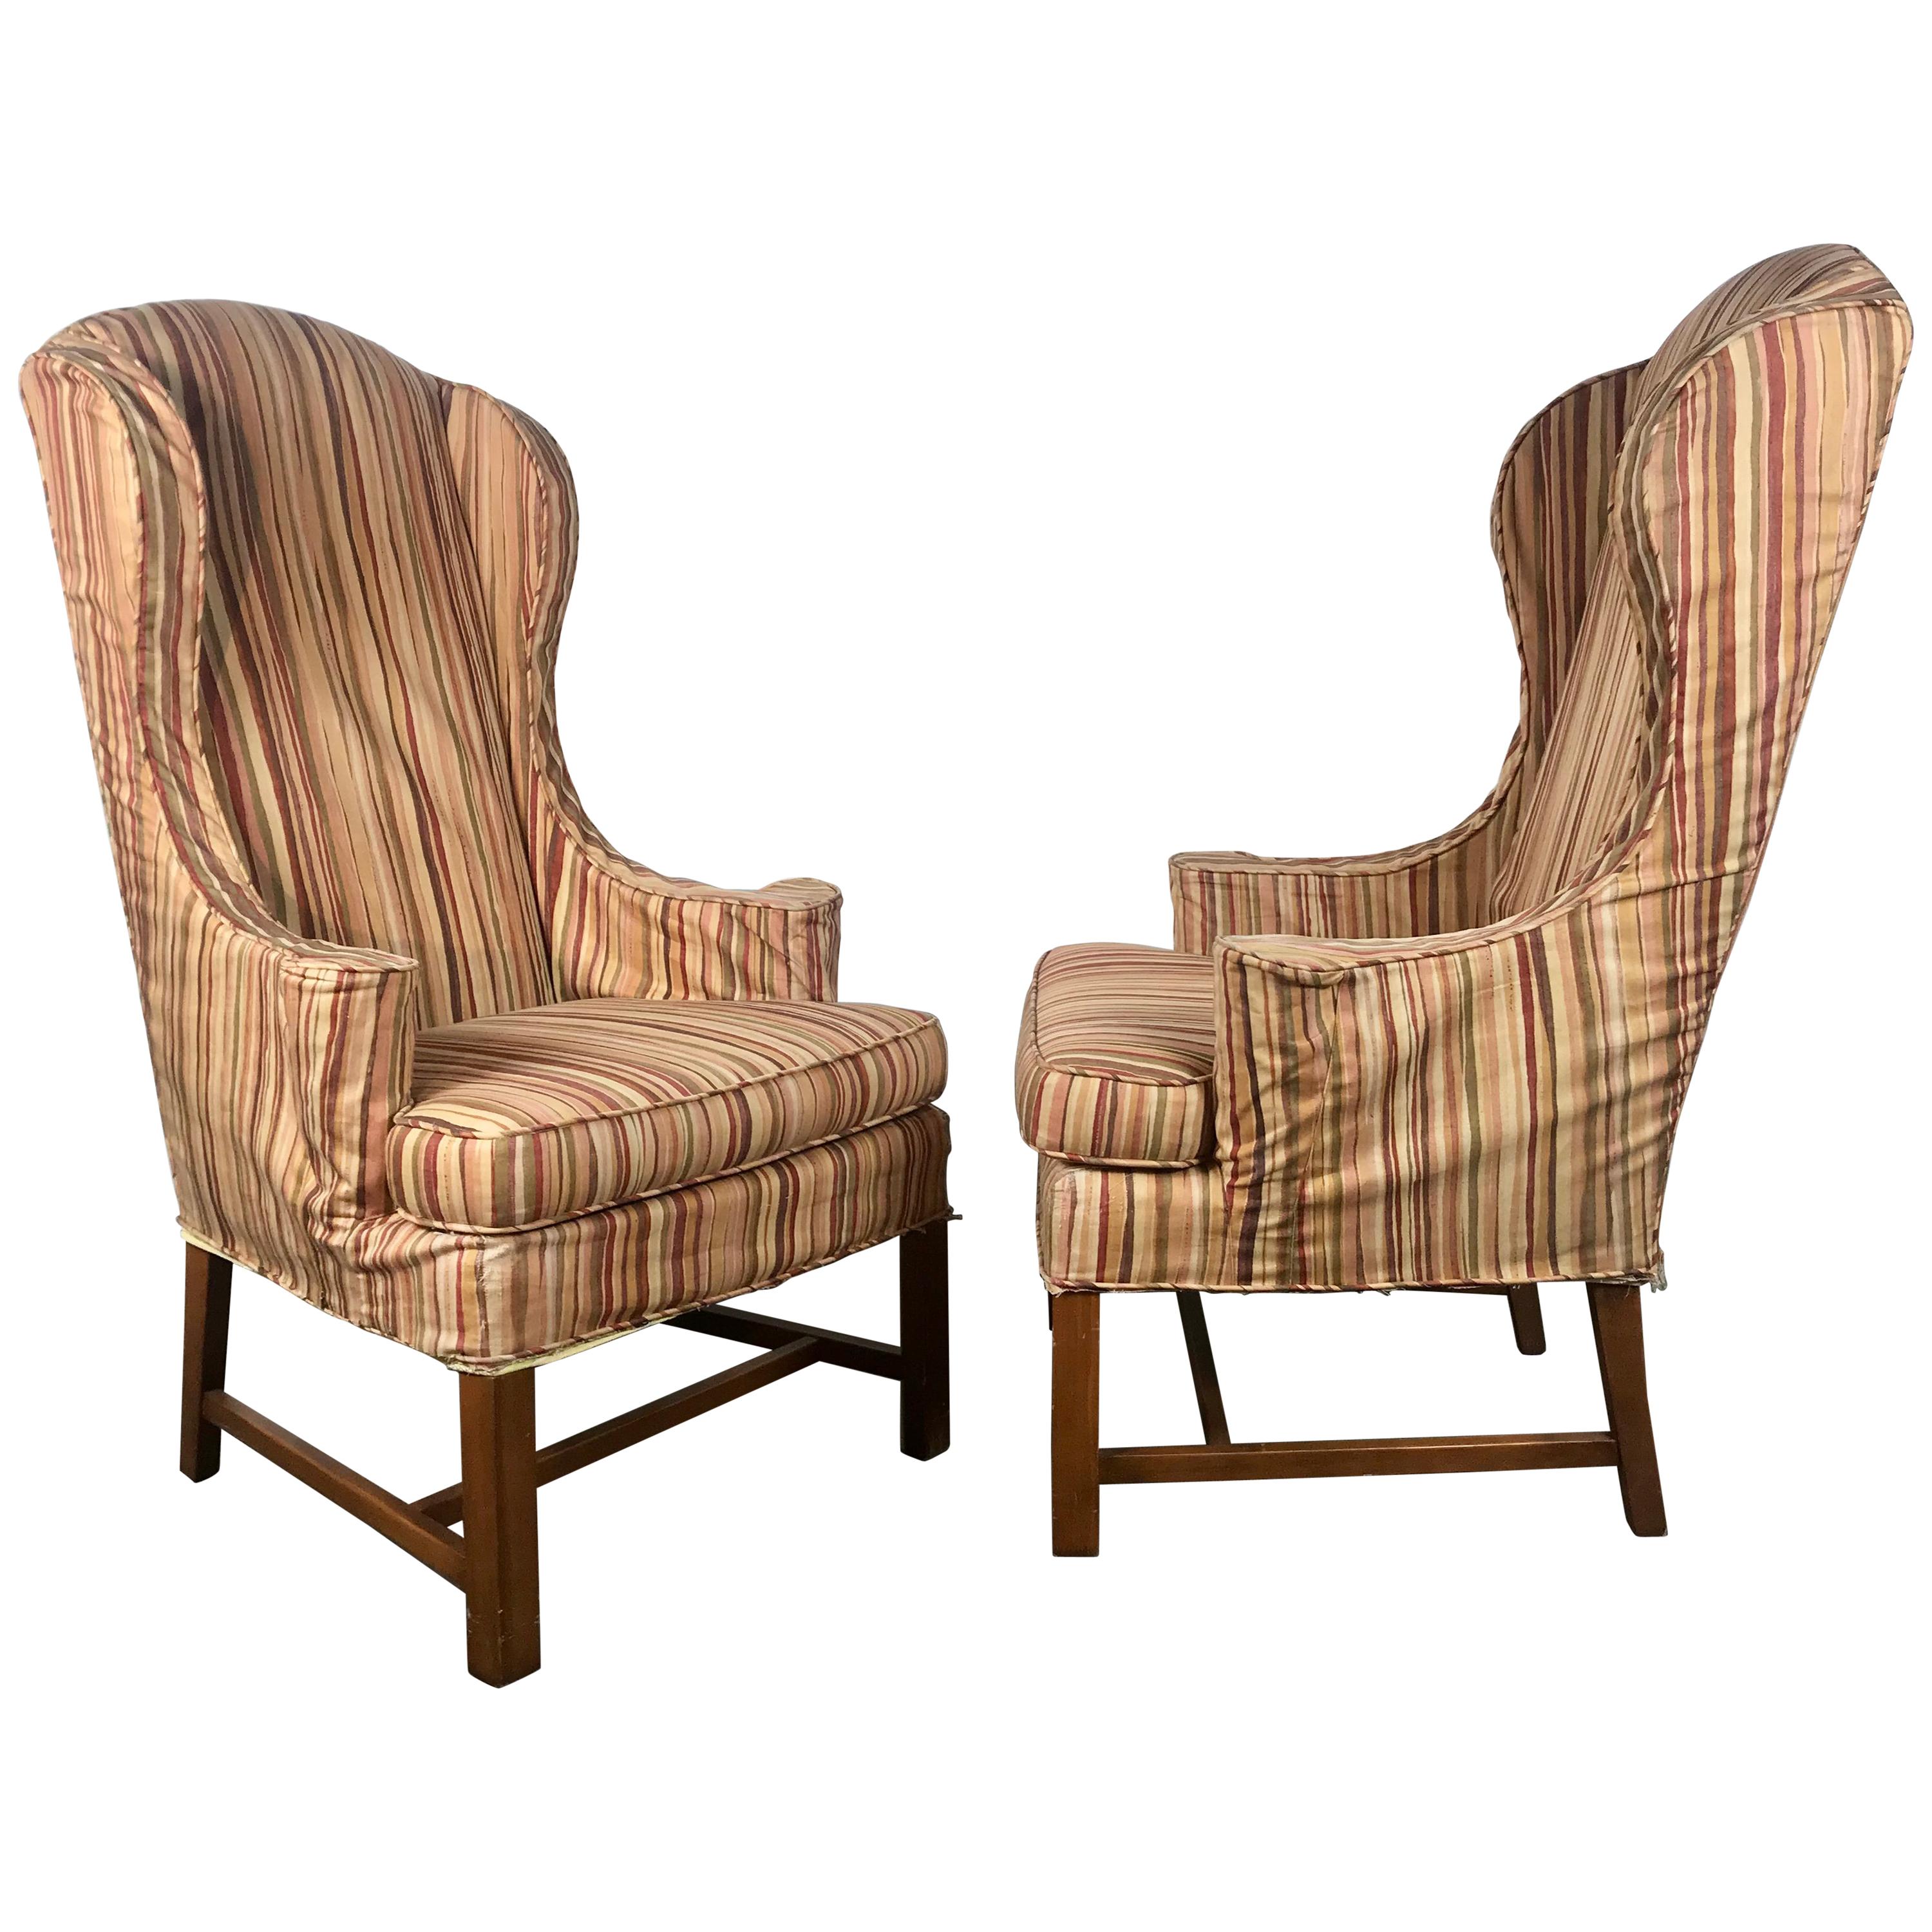 Dramatic Pair of Wing Back Scroll Arm Chairs Attributed to Kittinger